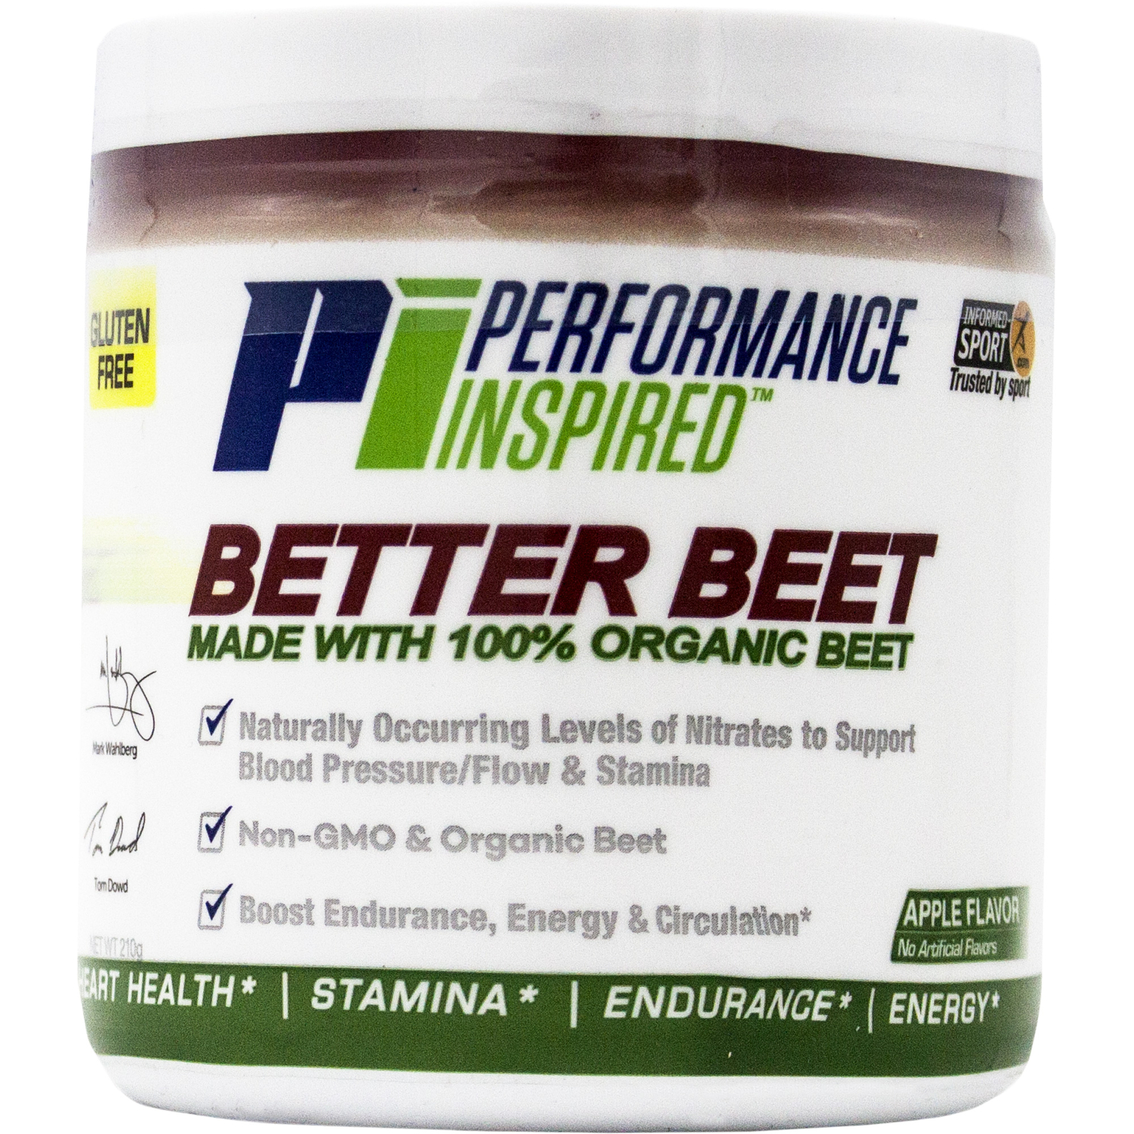 Performance Inspired Better Beet Powder - Image 1 of 2